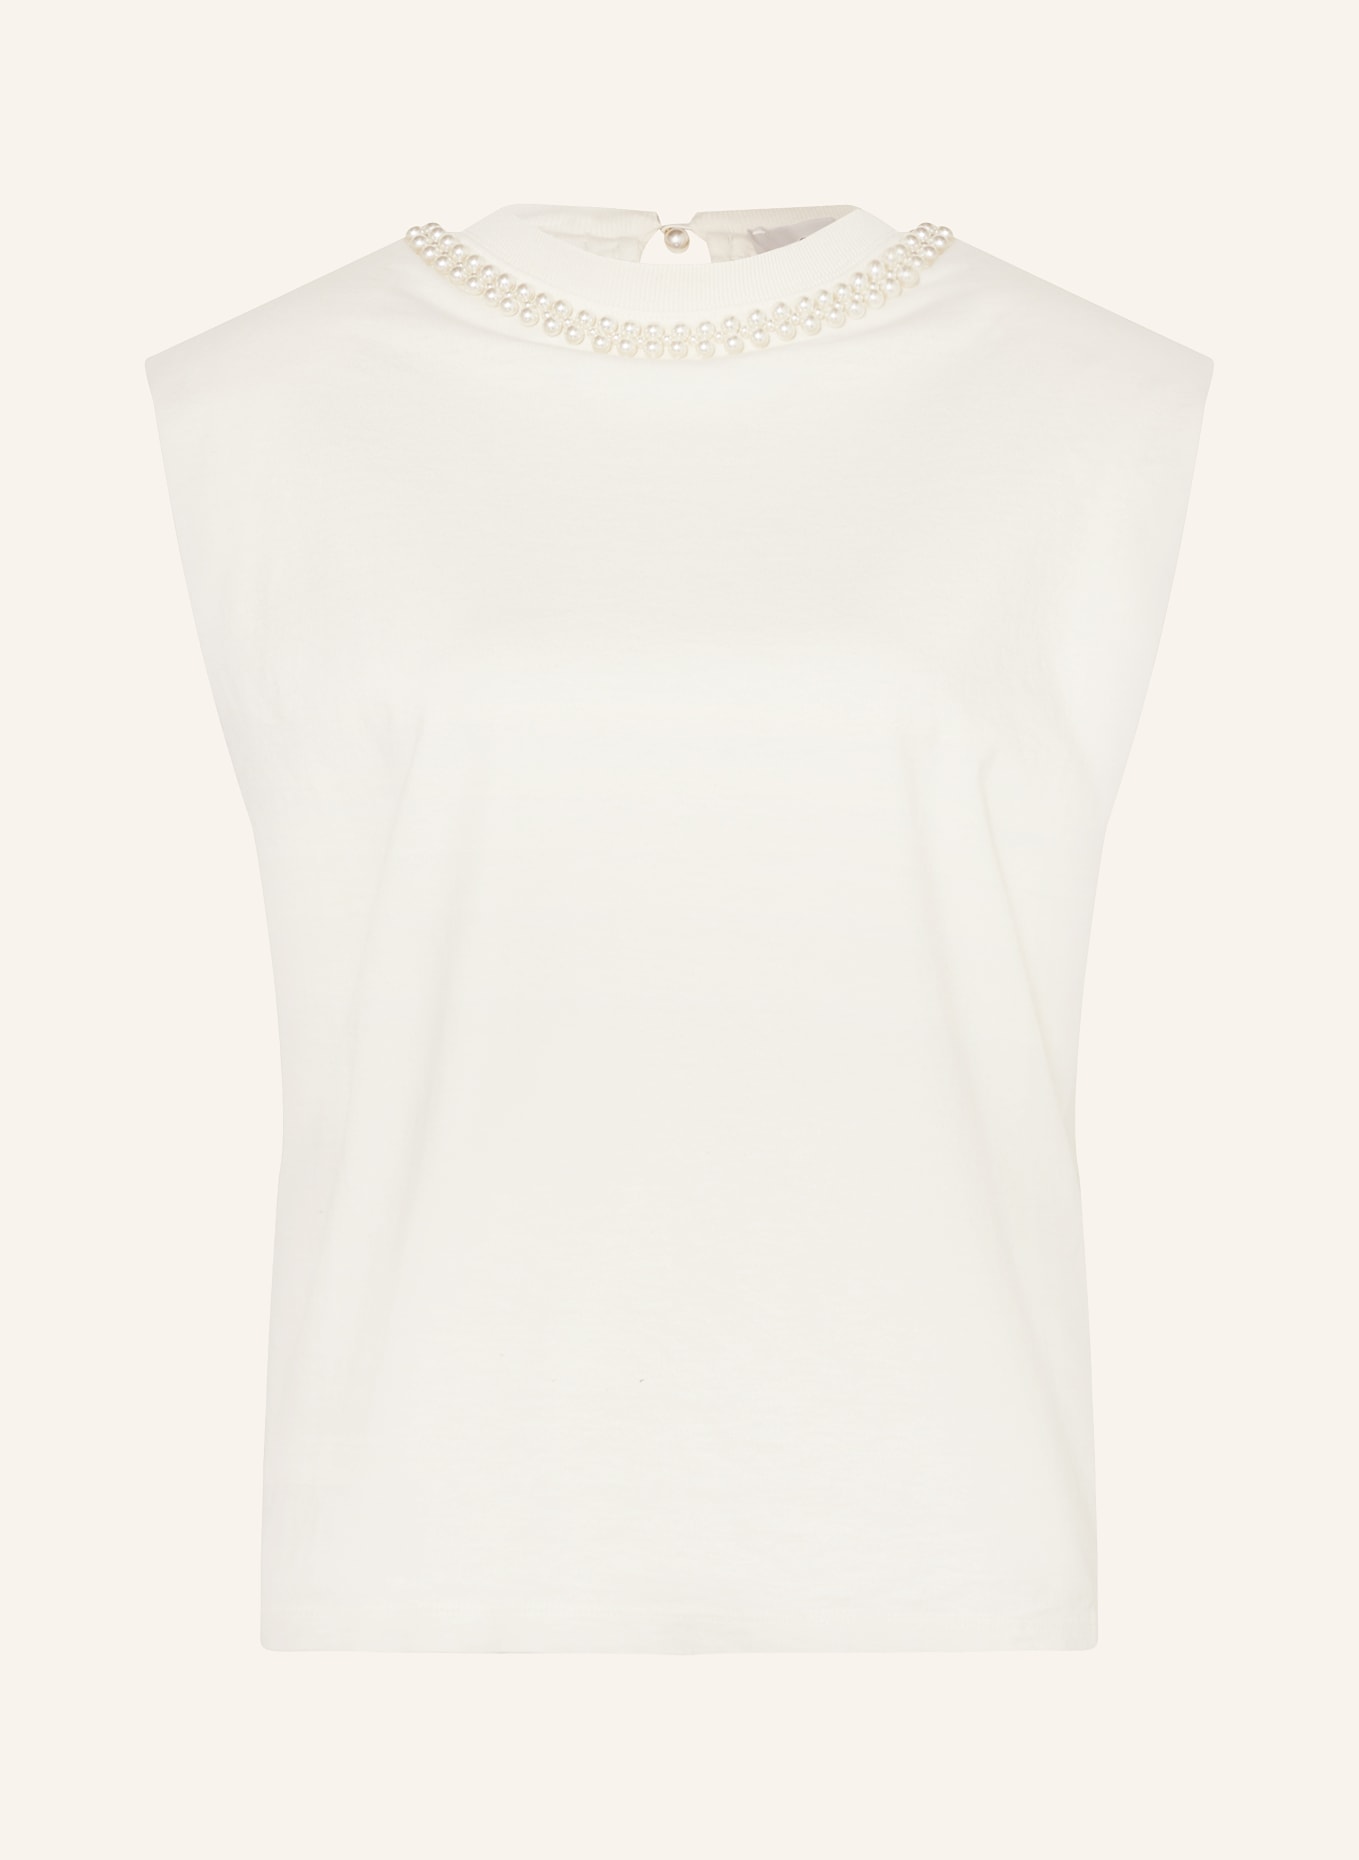 GOLDEN GOOSE Top with decorative beads, Color: ECRU (Image 1)